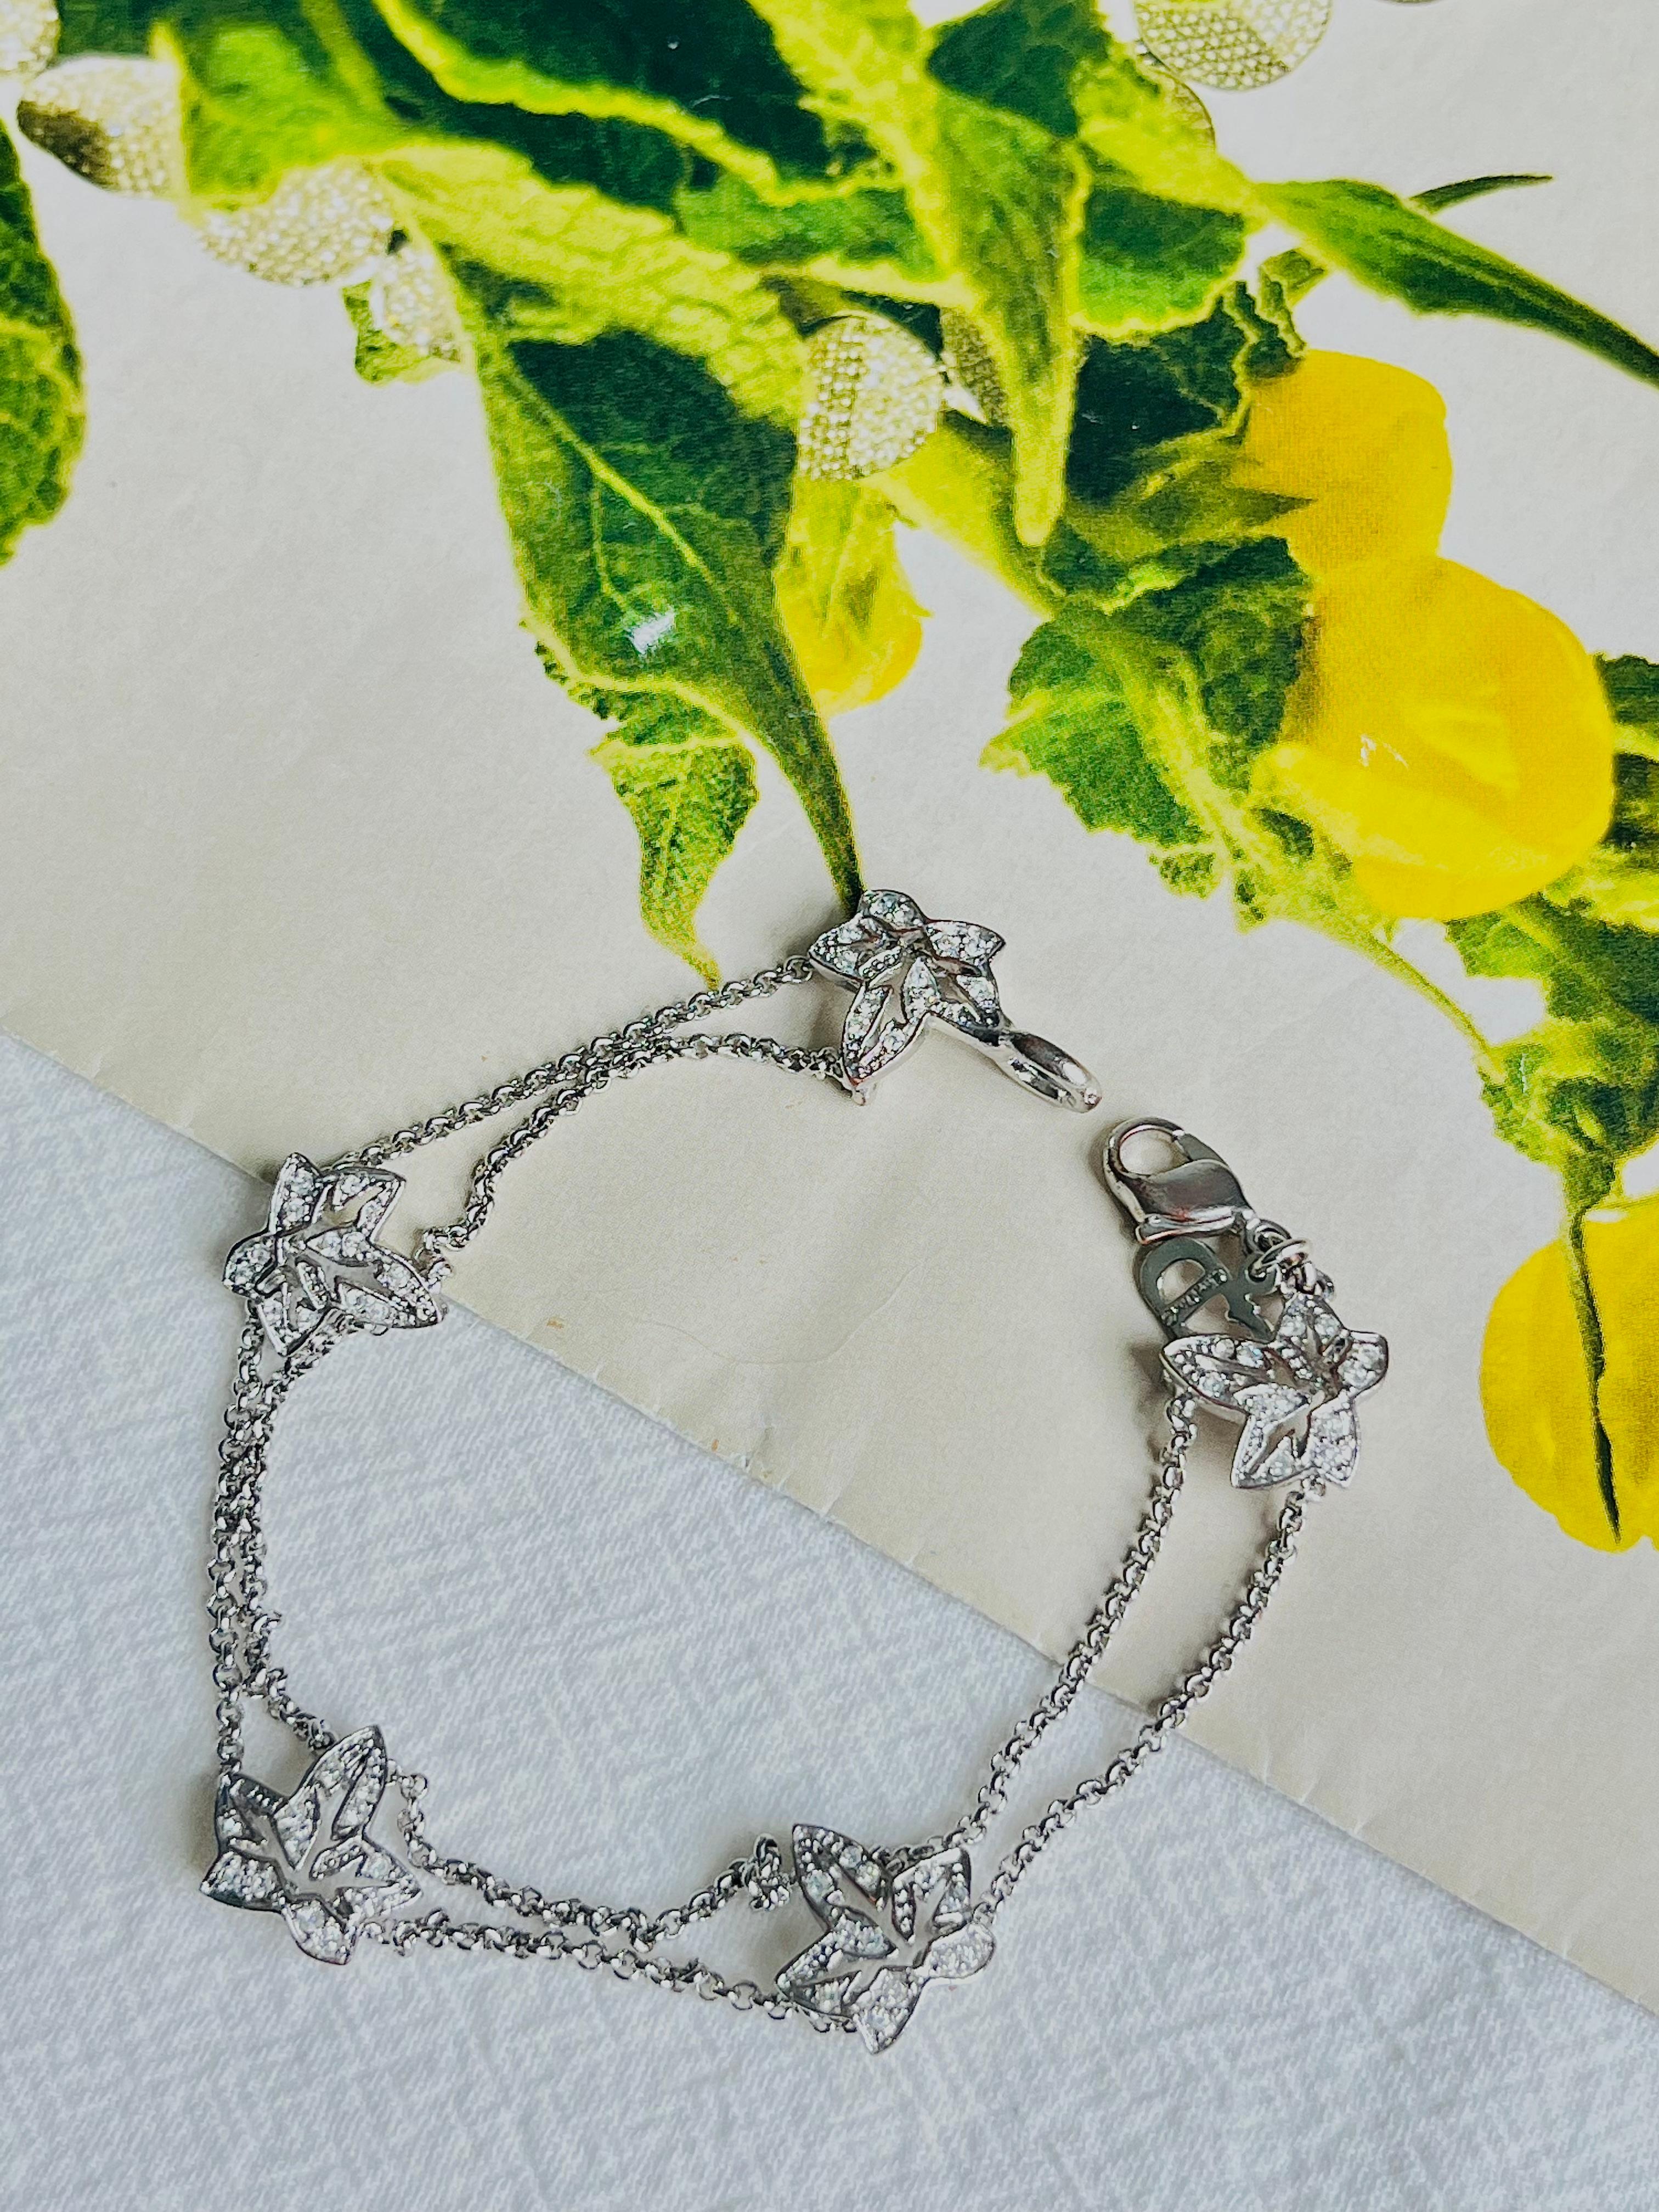 Christian Dior Vintage 1990s Ivy Maple Leaf Crystals Openwork Silver Bracelet In Good Condition For Sale In Wokingham, England